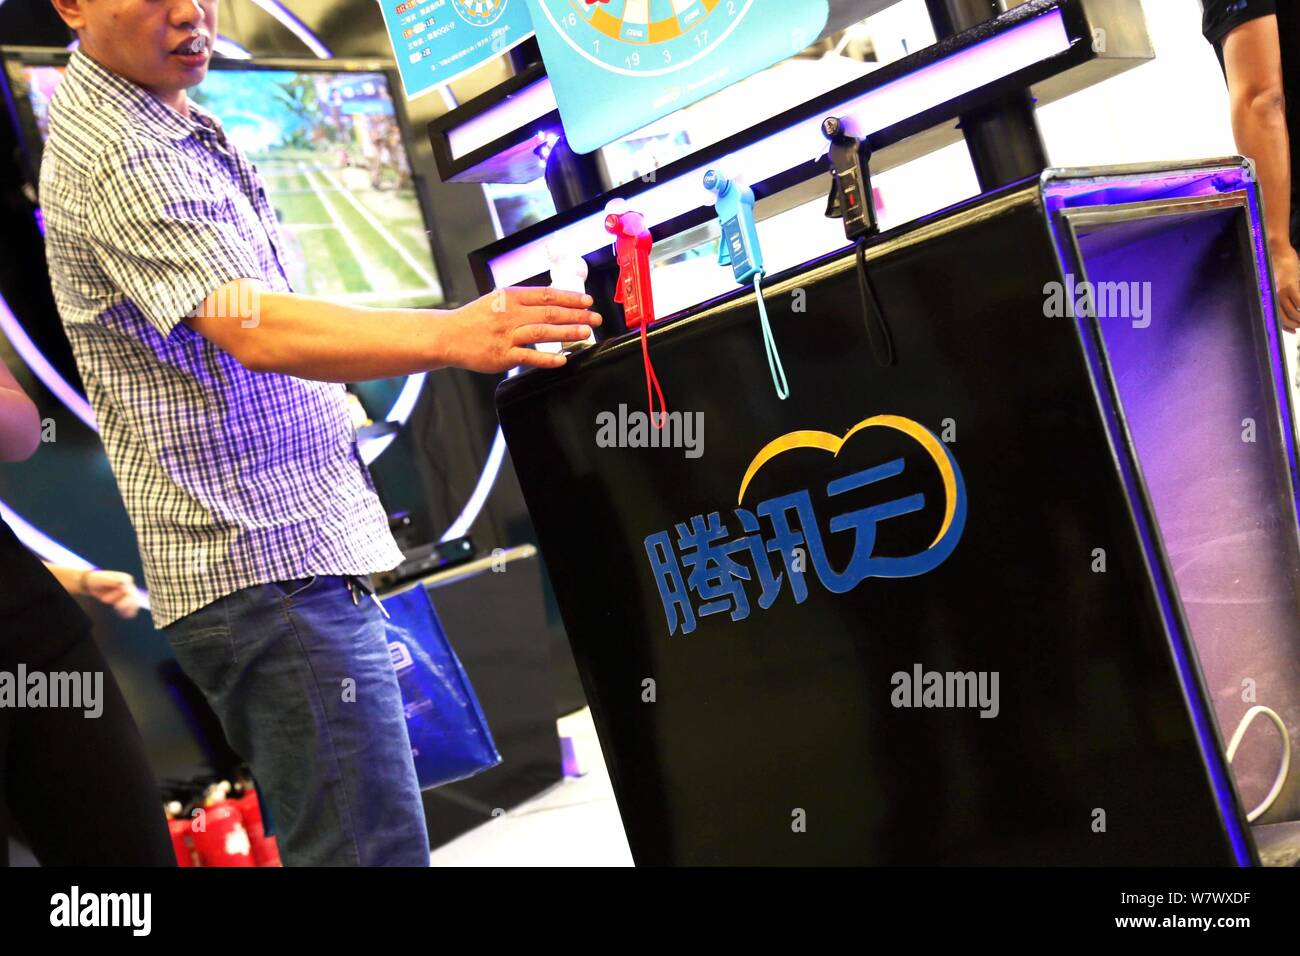 --FILE--People visit the stand of qcloud, the online cloud computing unit of Tencent, during the 13th China Digital Entertainment Expo, also known as Stock Photo